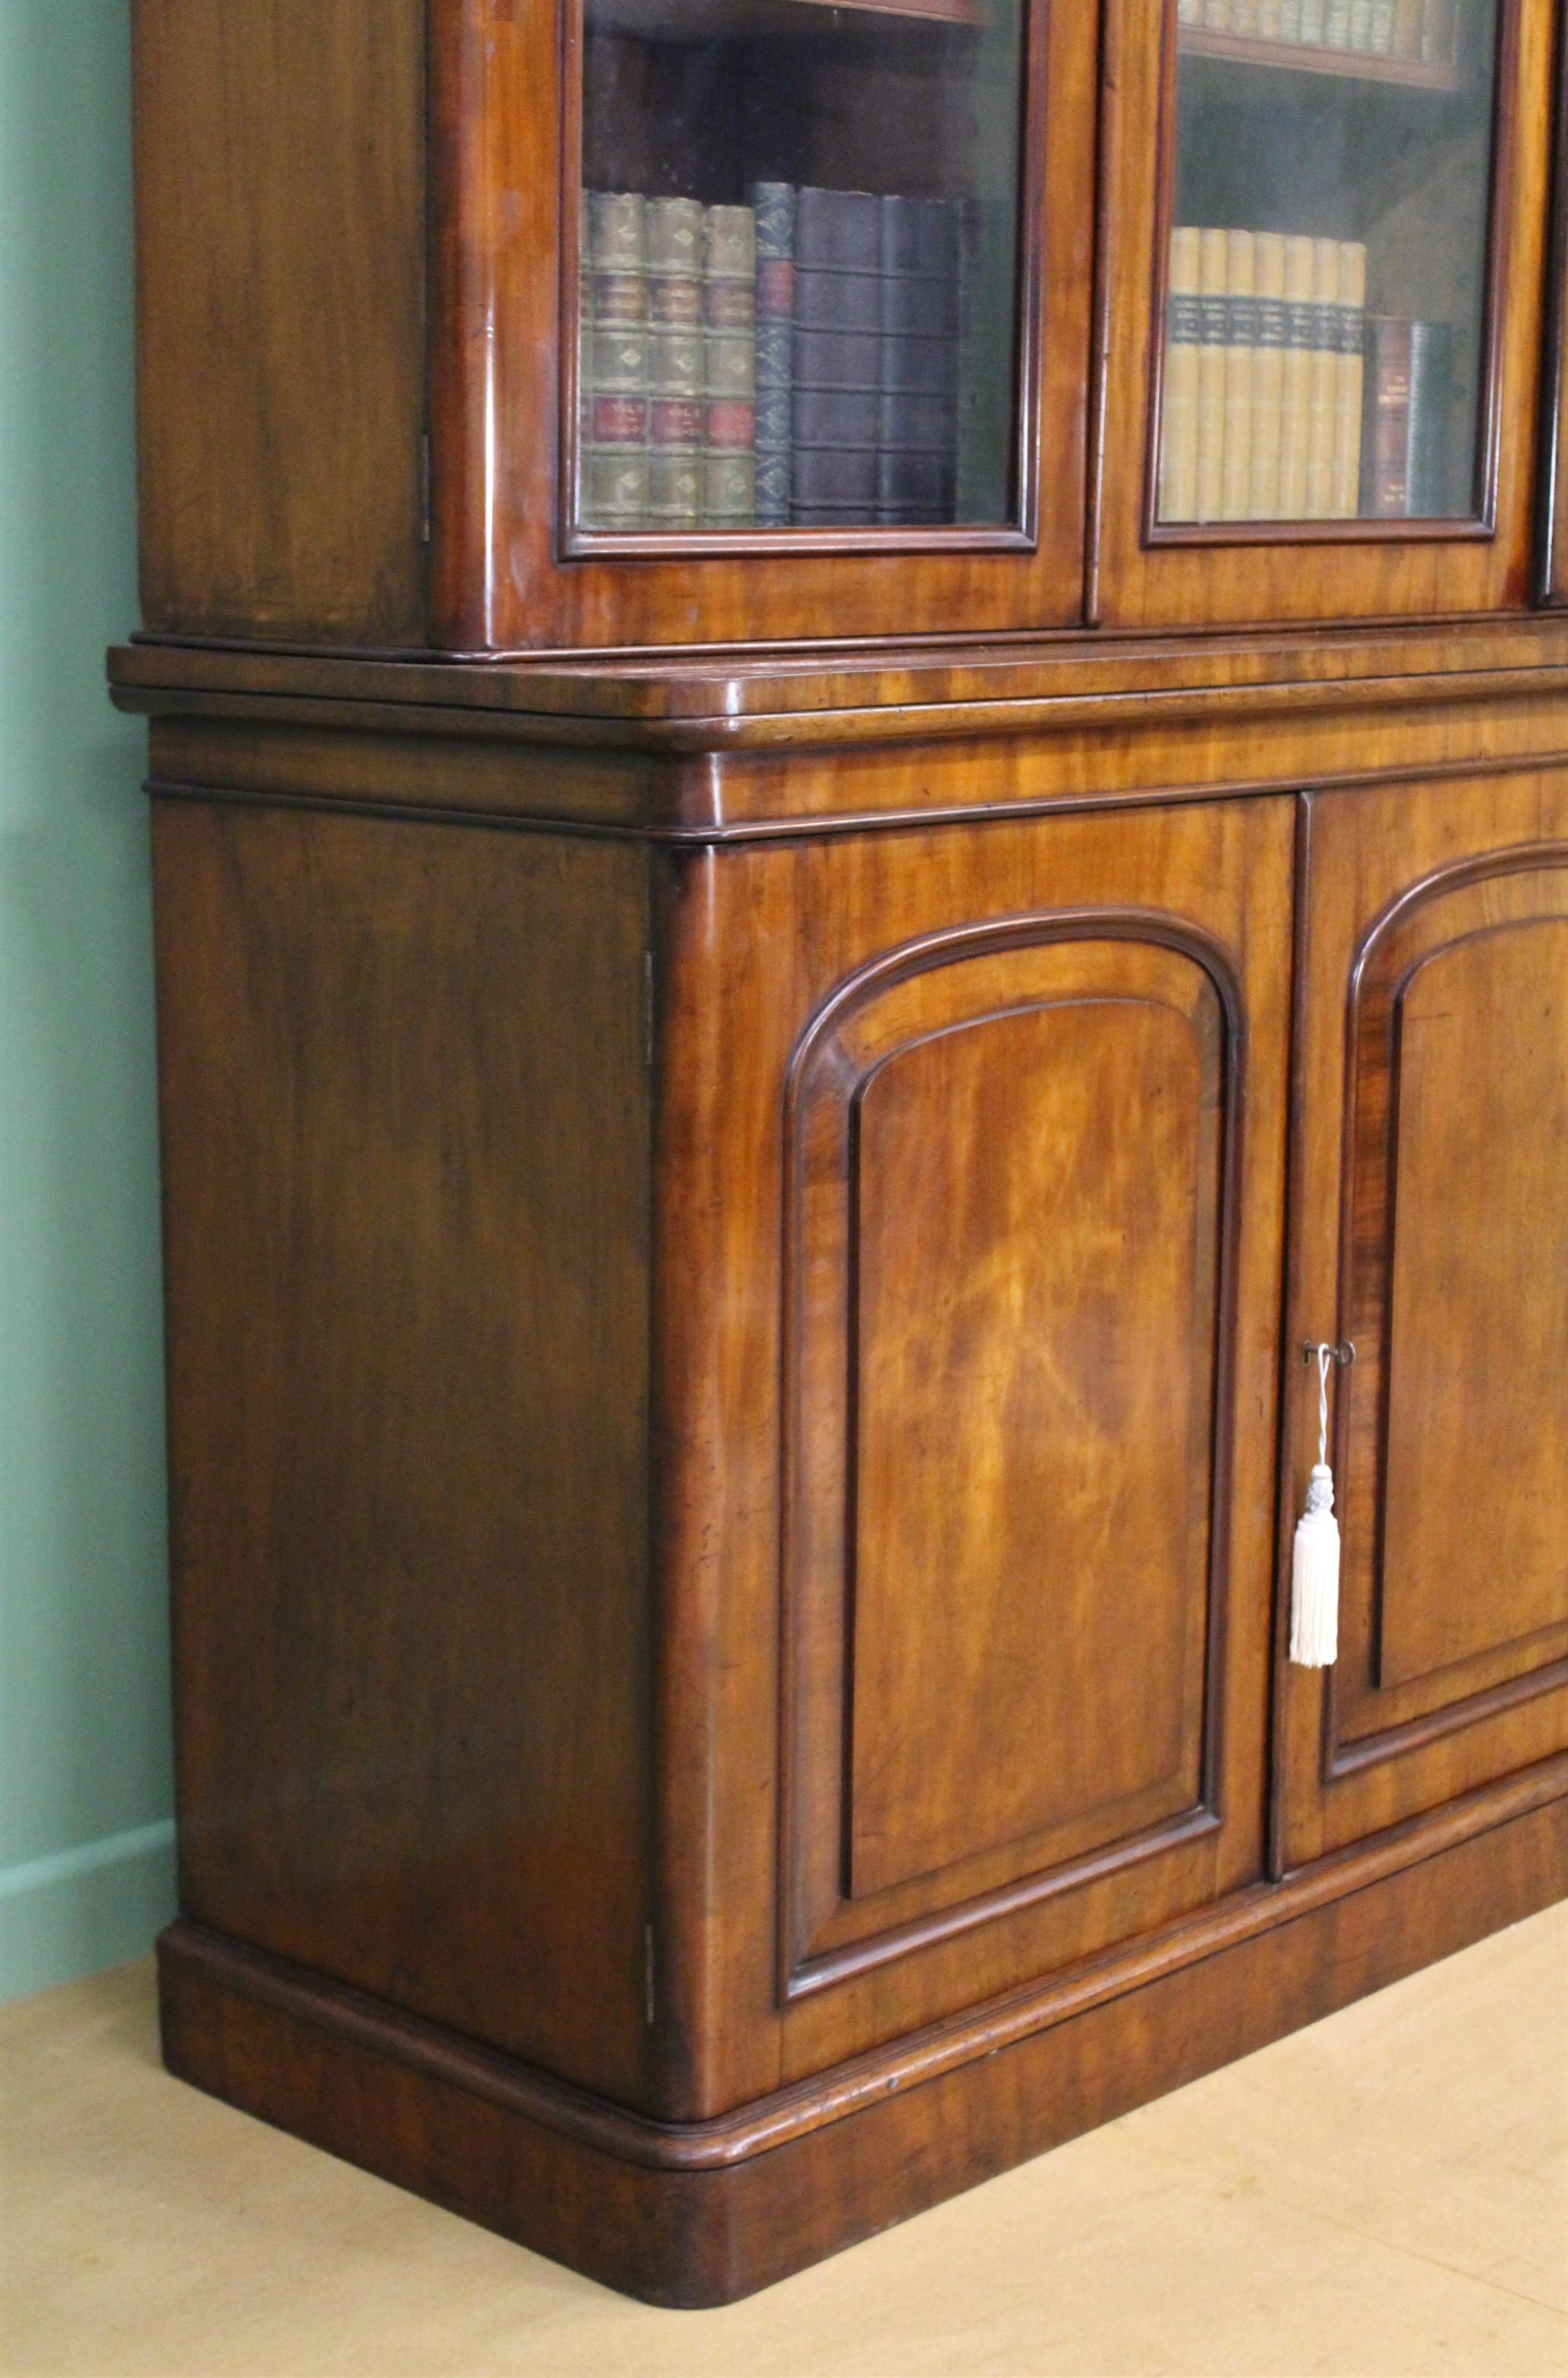 A splendid Victorian period figured mahogany library bookcase. Of fine construction in solid mahogany with attractive figured mahogany veneers. With 3 glazed doors over 3 cupboard doors. All doors open to access shelved interiors, affording a wealth